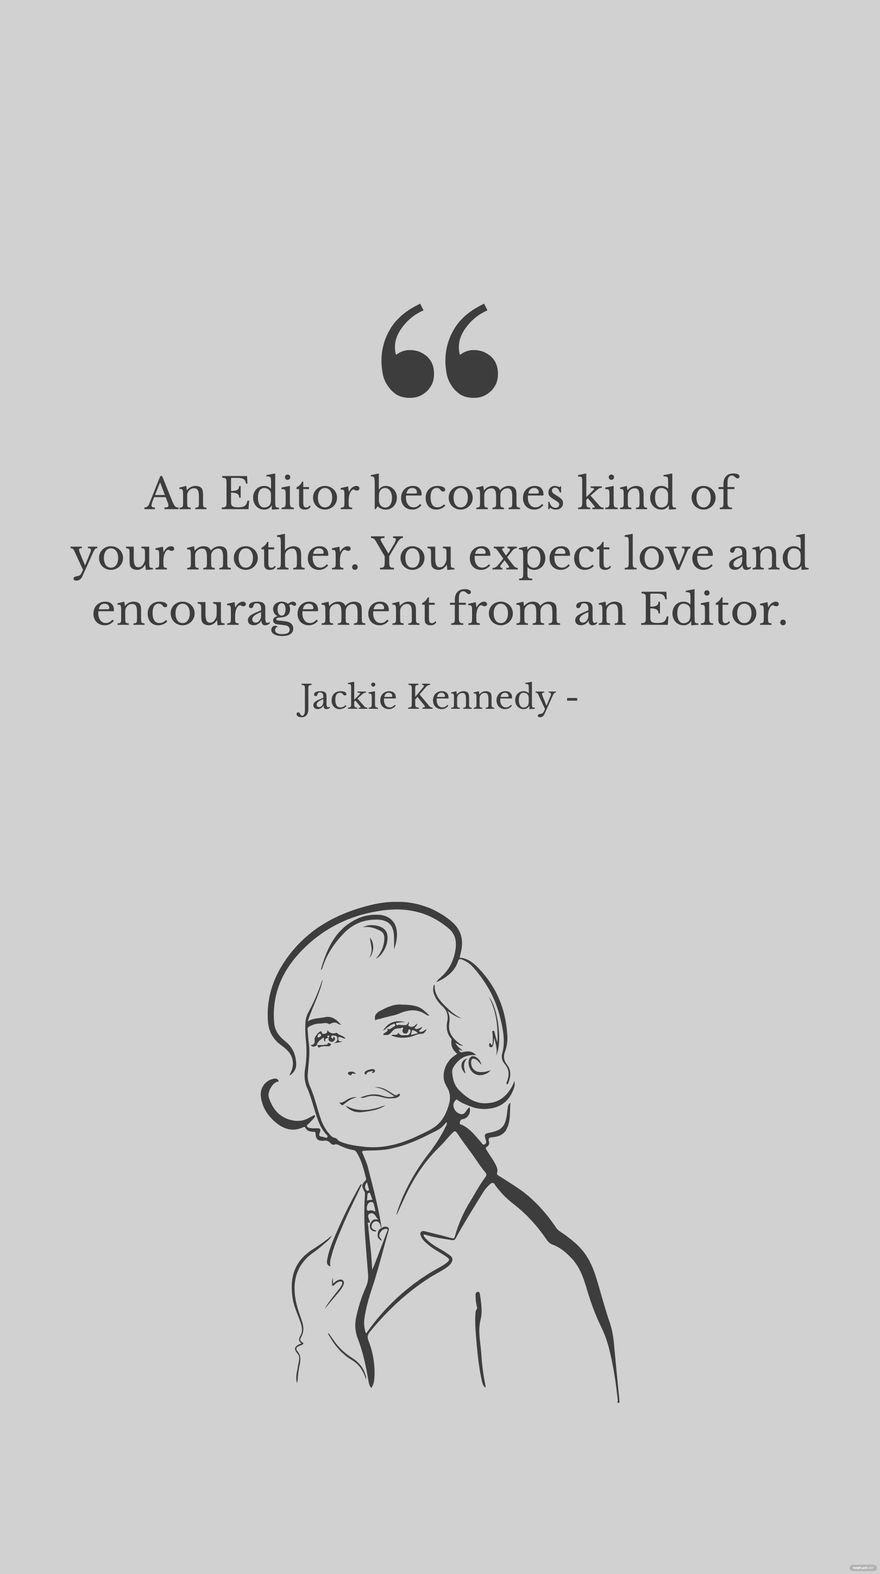 Jackie Kennedy - An Editor becomes kind of your mother. You expect love and encouragement from an Editor. Template